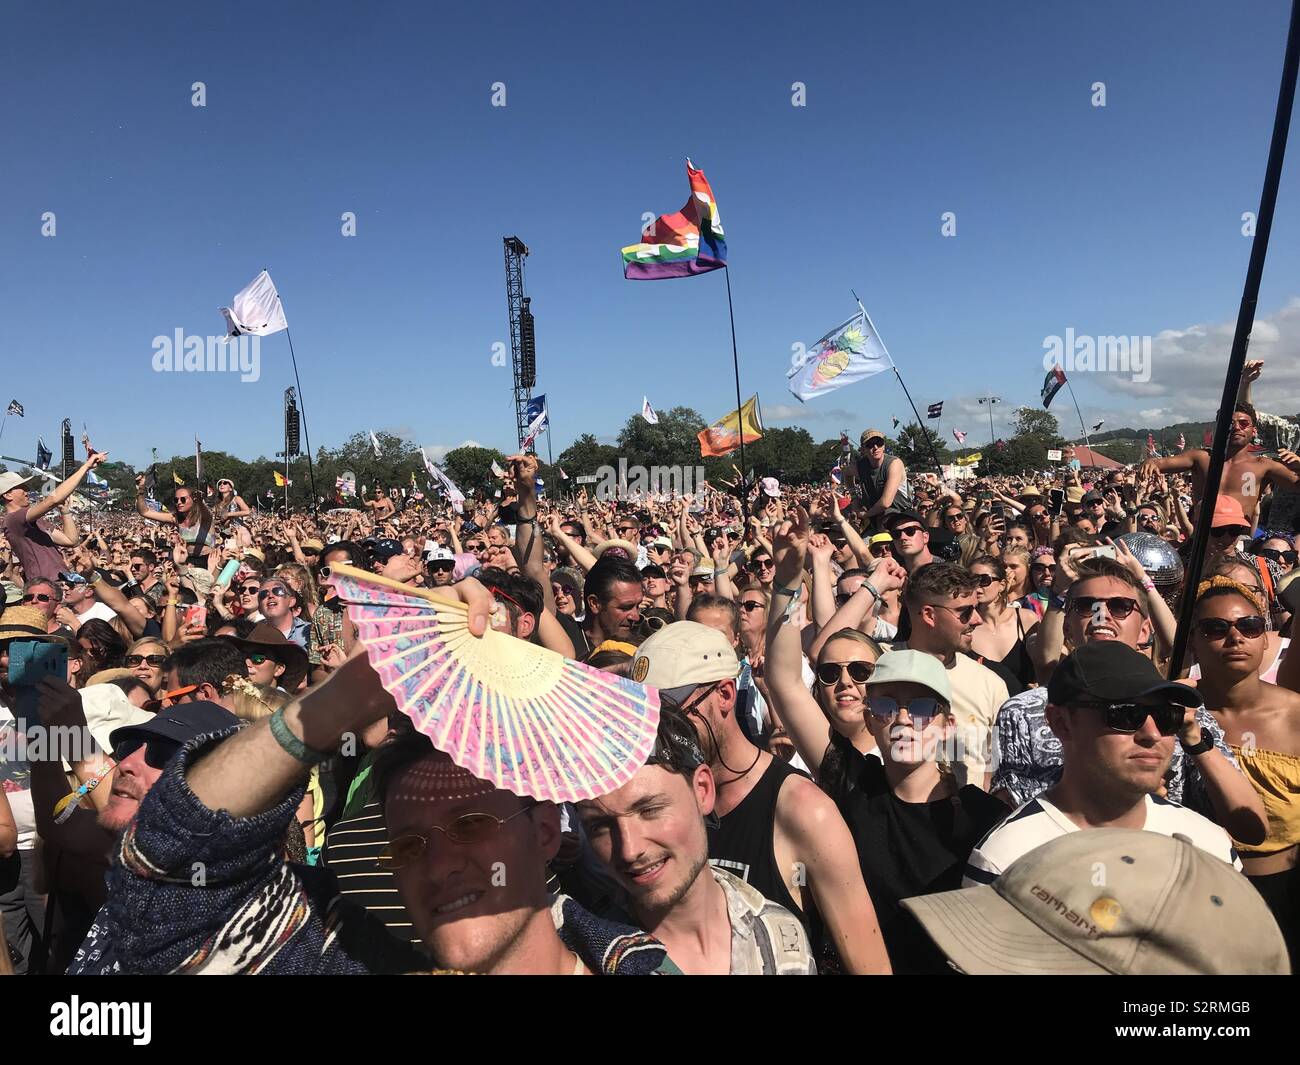 The huge crowd at the gig played by Kylie Minogue at the Glastonbury Festival 2019 Stock Photo